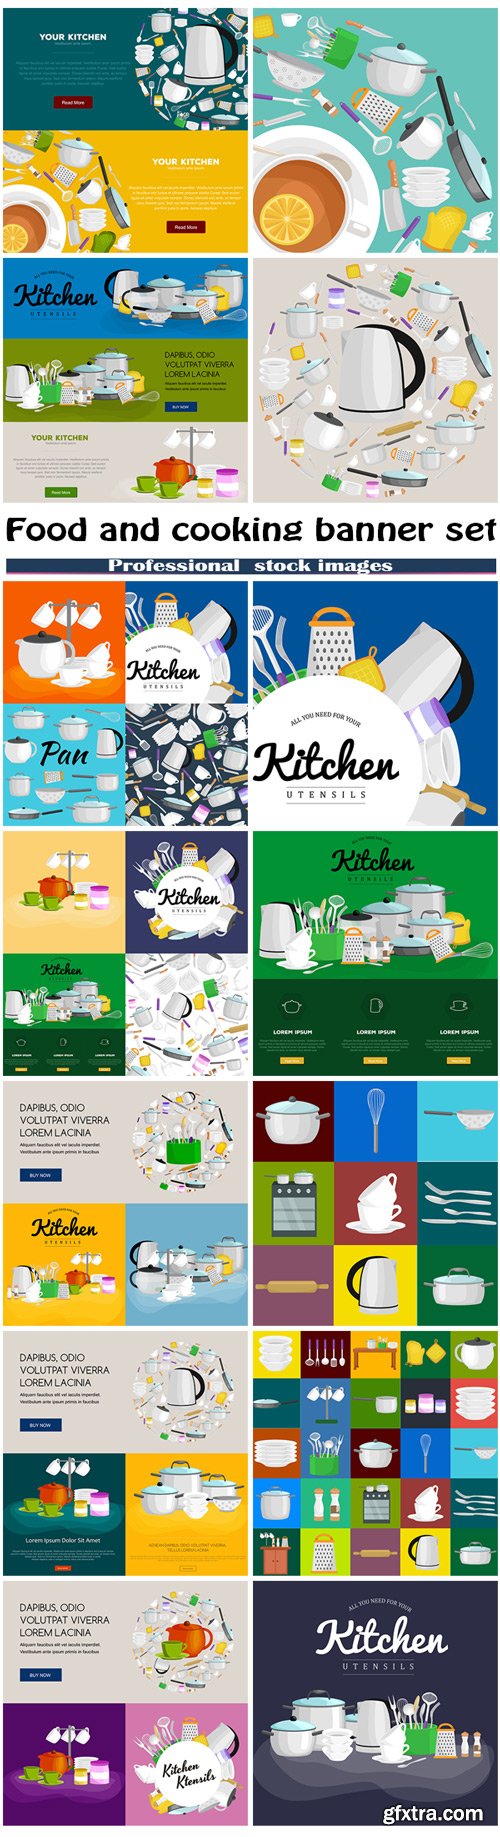 Food and cooking banner set and kitchenware utensils